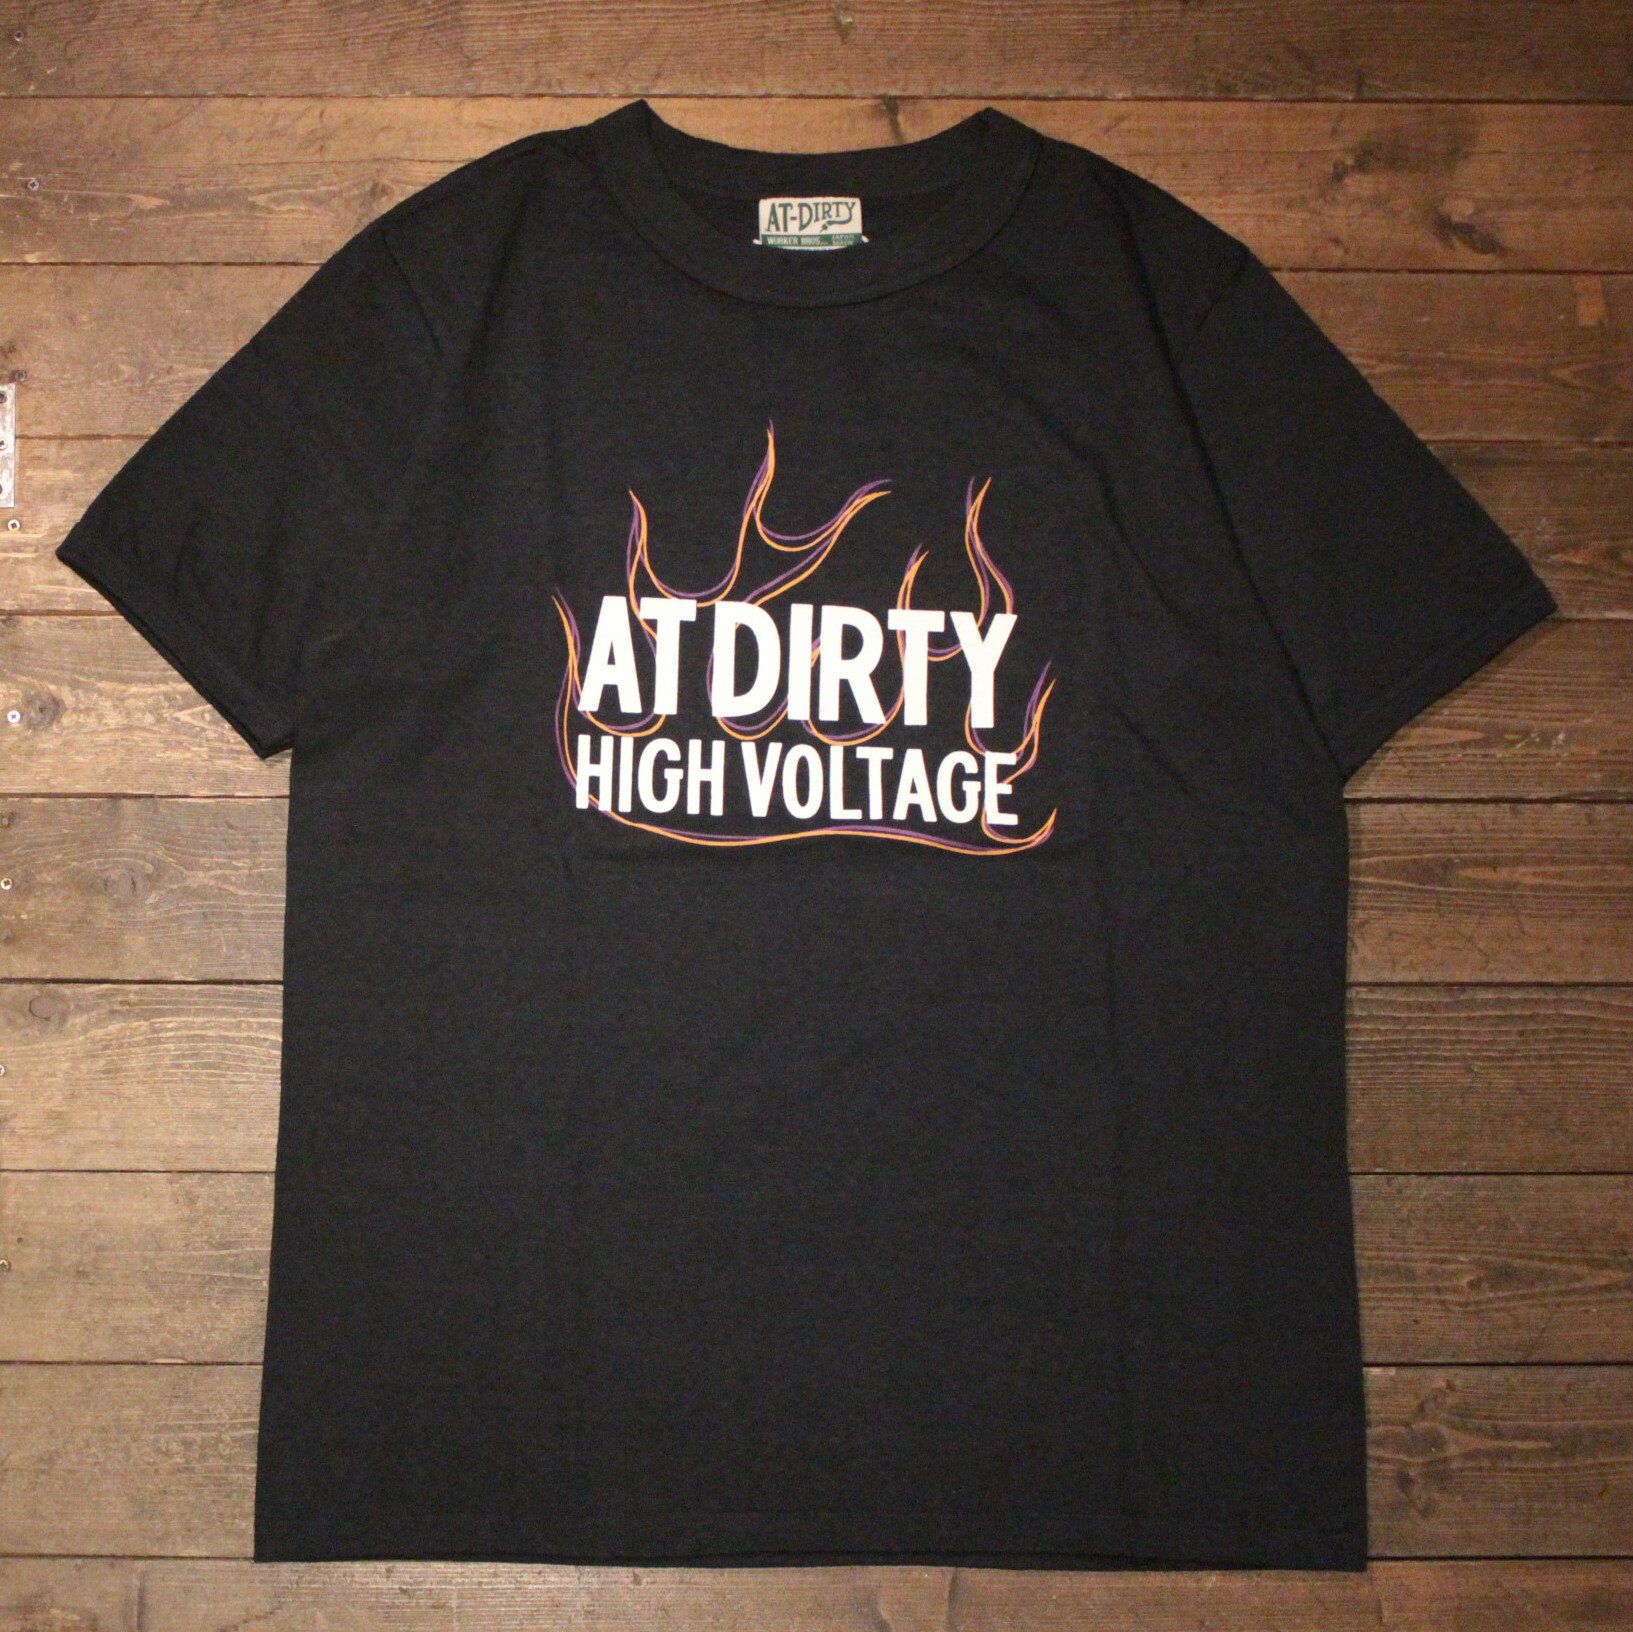 AT-DIRTY"HIGH VOLTAGE"S/S TEEBLACK【AT-DIRTY】(アットダーティー)正規取扱店(Official Dealer)Cannon Ball(キャノンボール)【あす楽対応/半袖Tシャツ/プリントTシャツ】